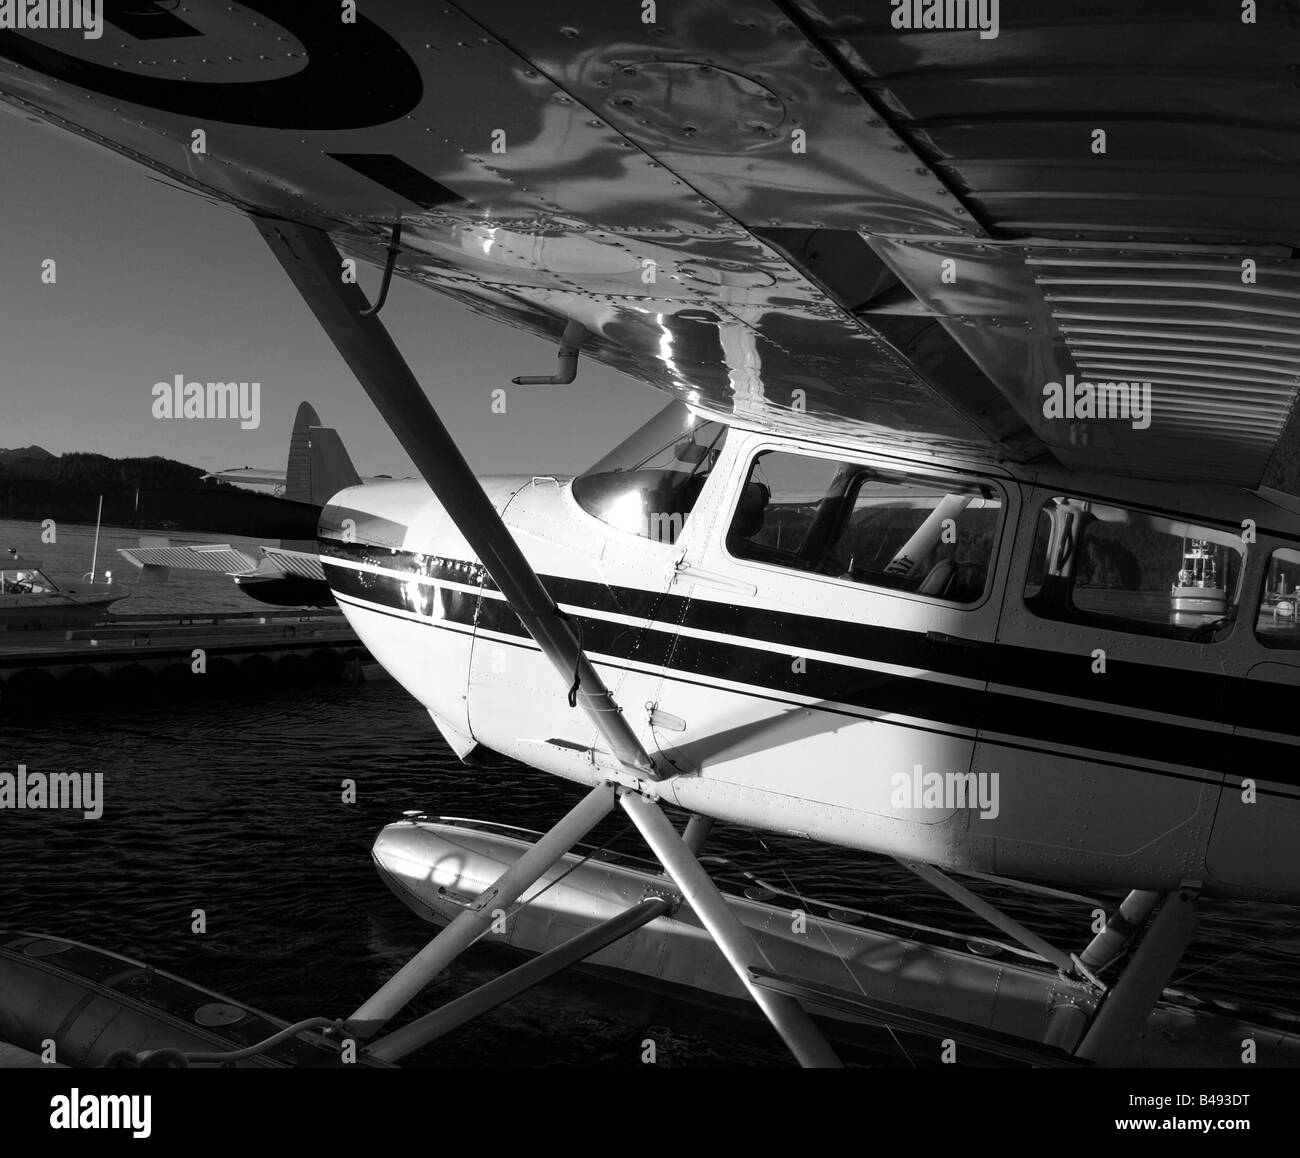 under the wing of a seaplane Stock Photo